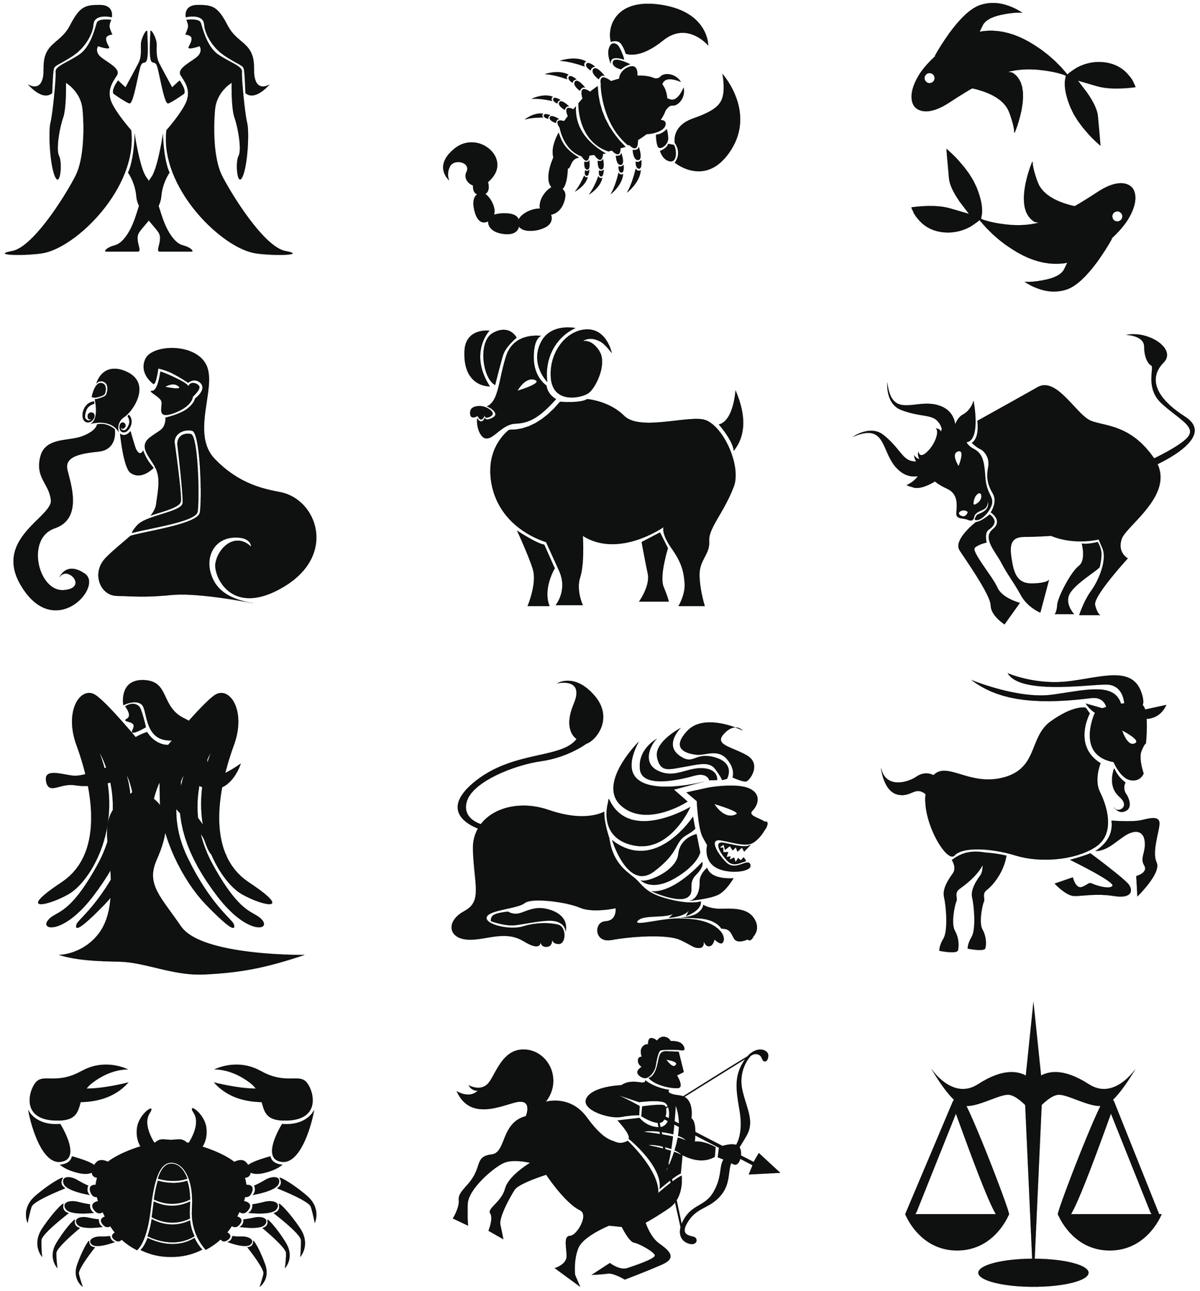 Zodiac Signs: How Sexy are You Depends on Your Sign - Astrology Bay